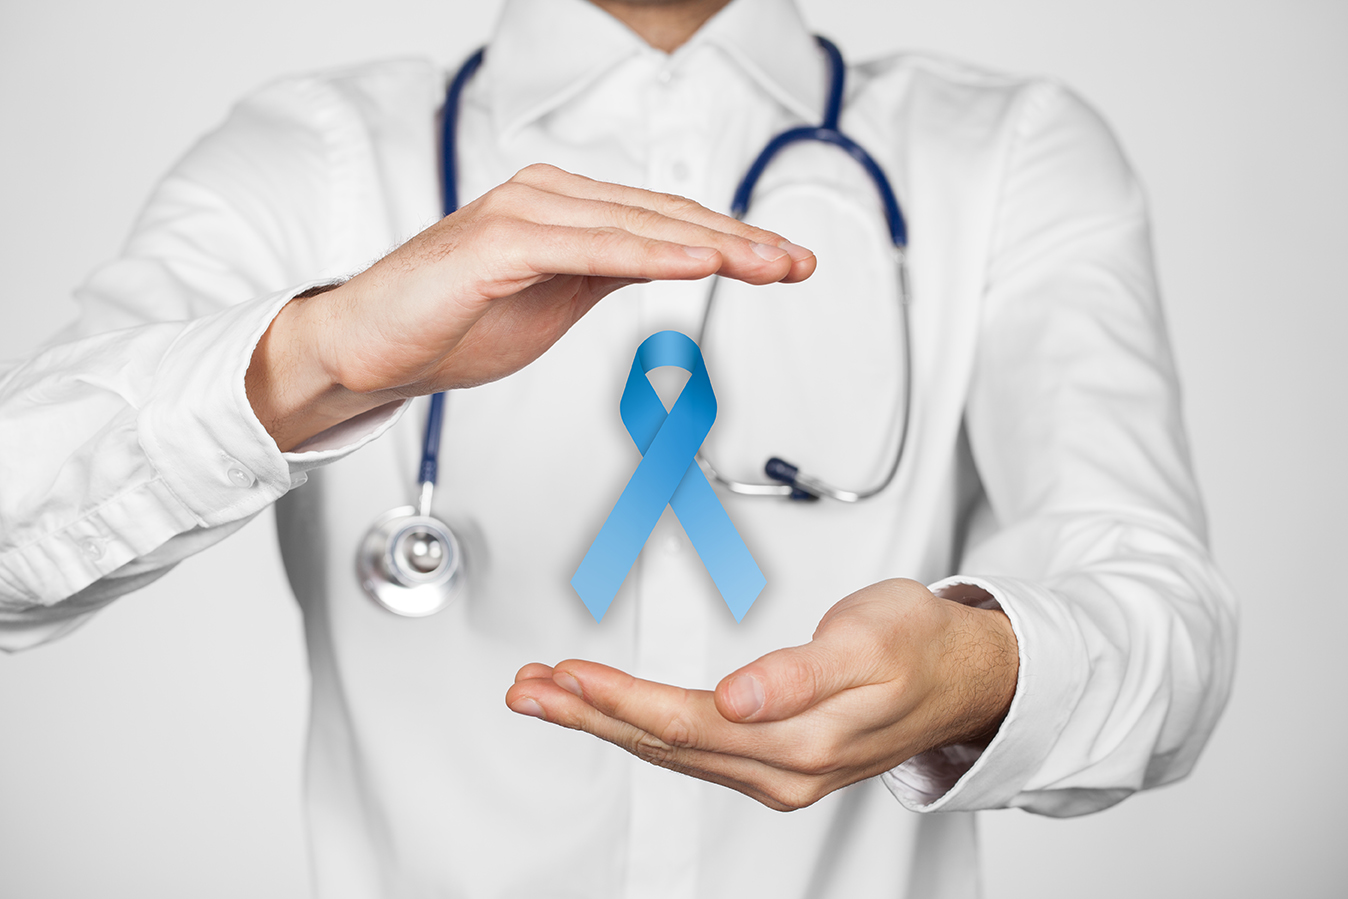 Prostate cancer prevention and genetic disorder awareness - doctor (general practitioner) with protective and support gesture and blue ribbon.